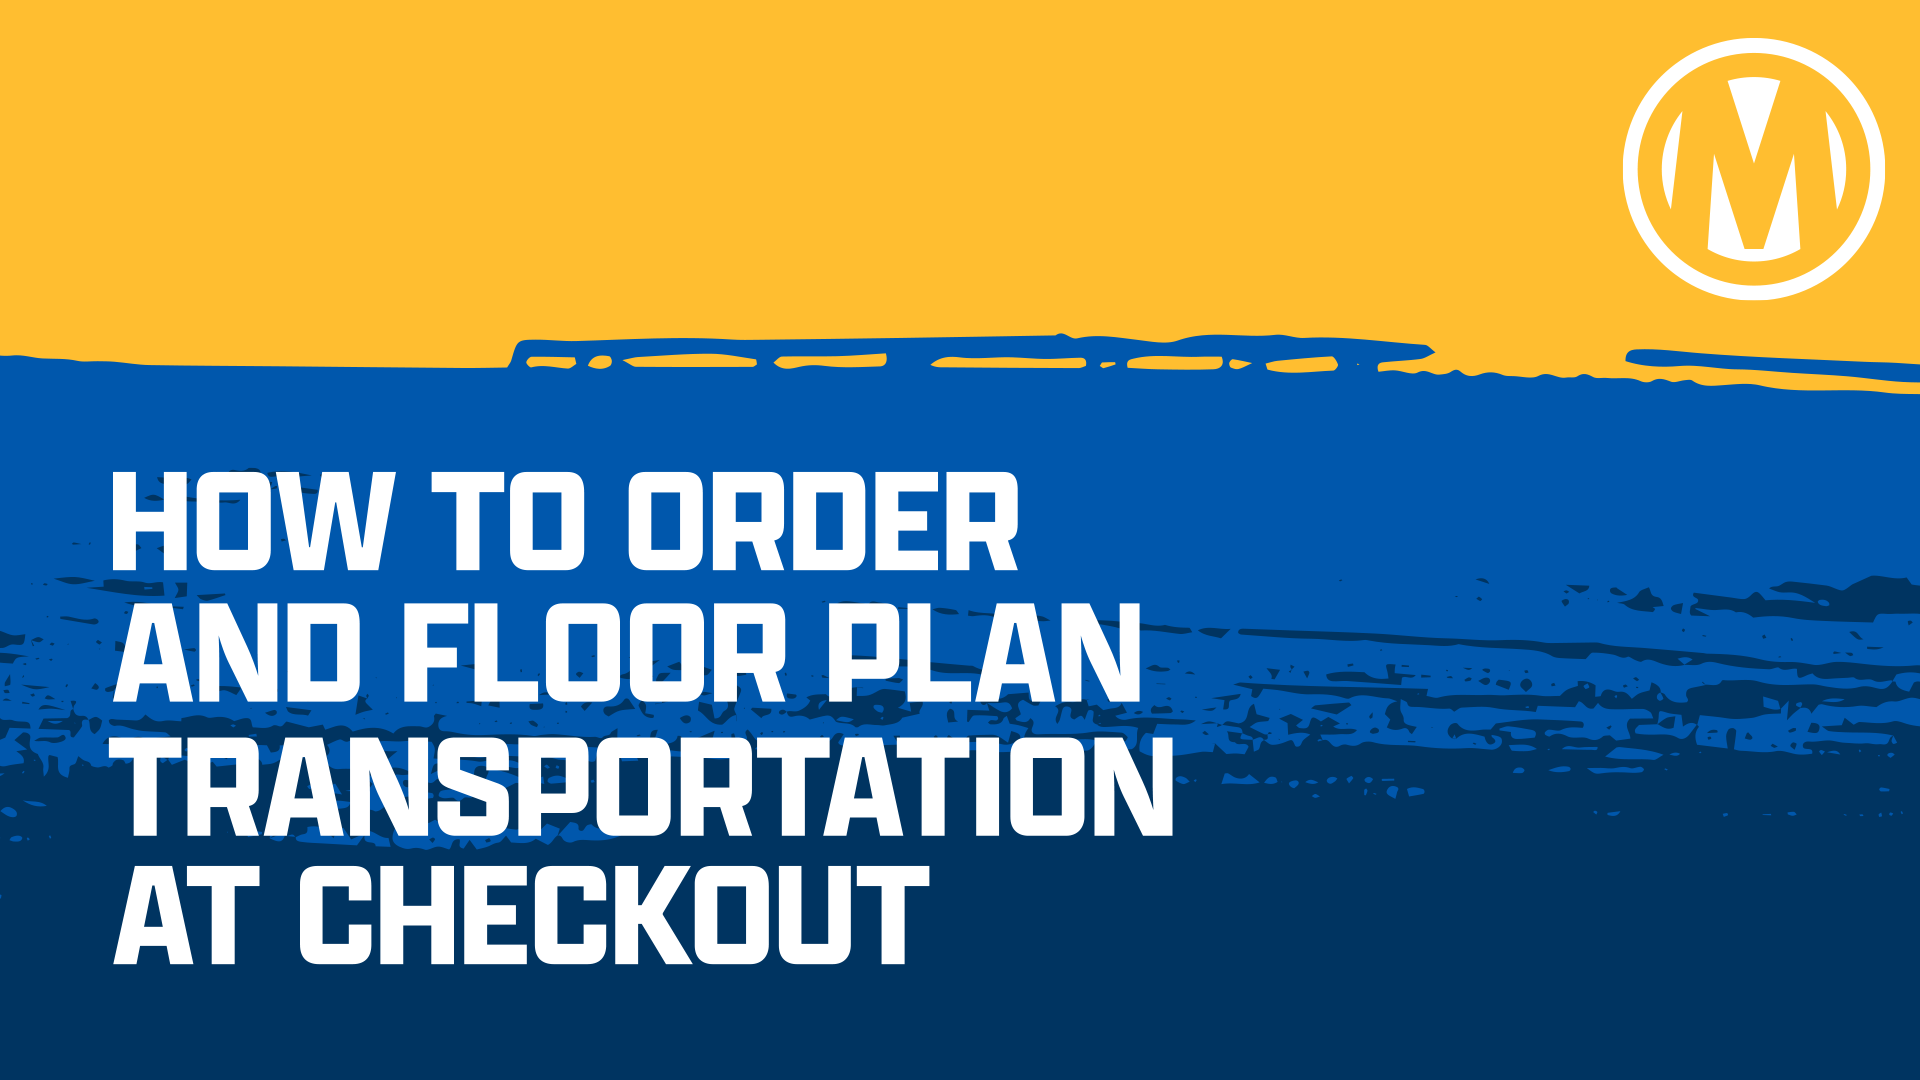 How to Order and Floor Plan Transportation at Checkout